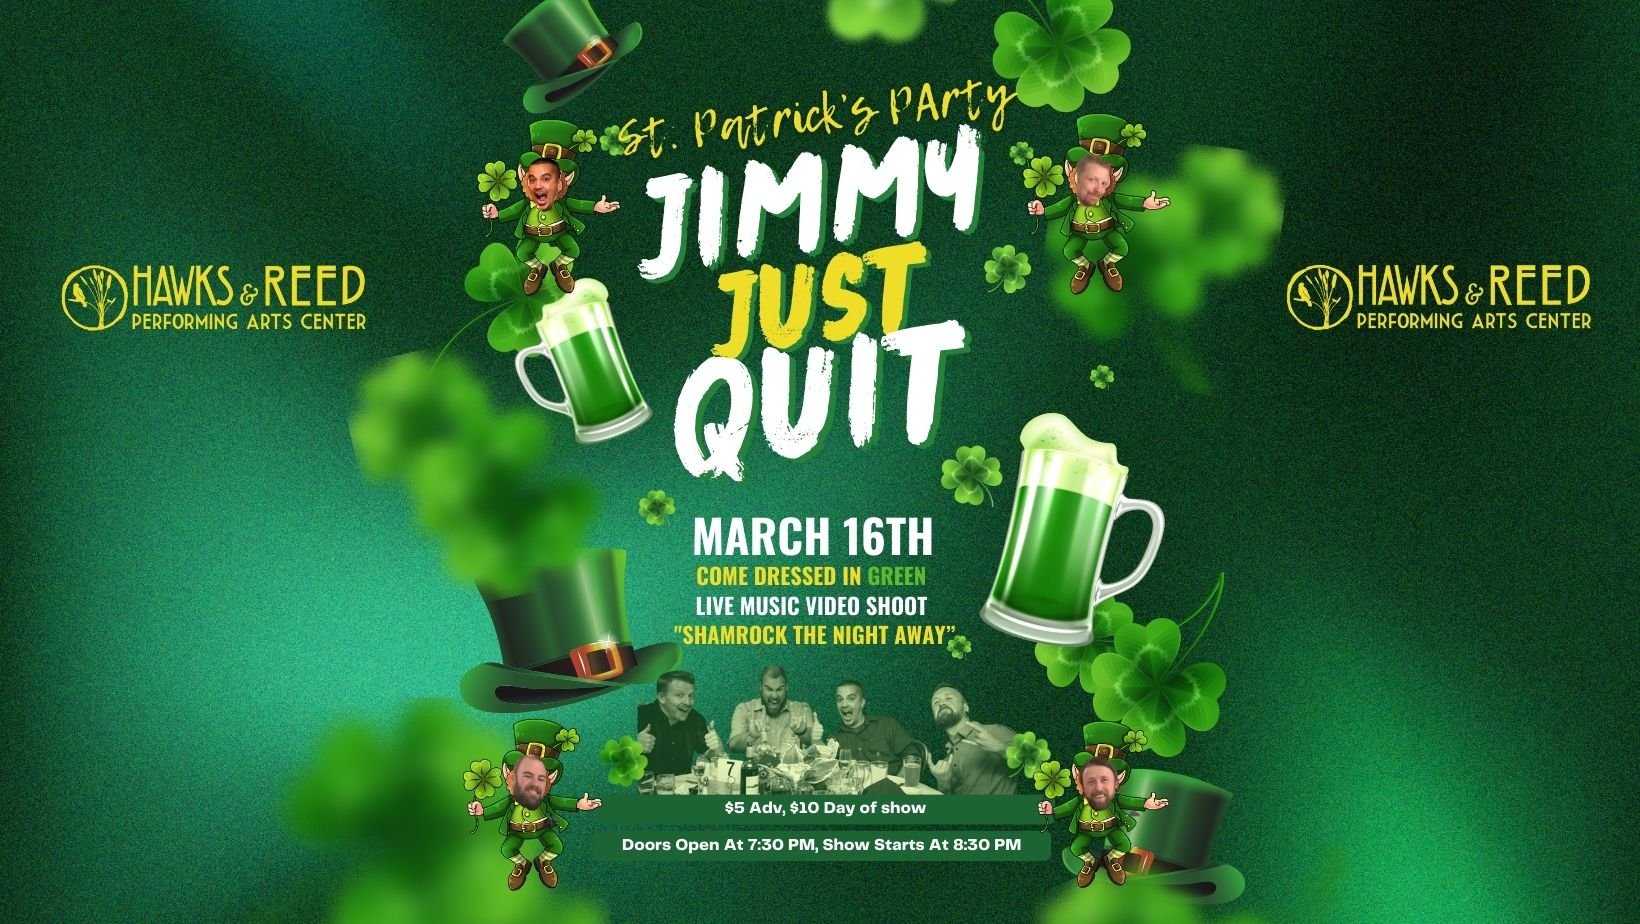 Jimmy Just-Quit: St. Patrick’s Day Party